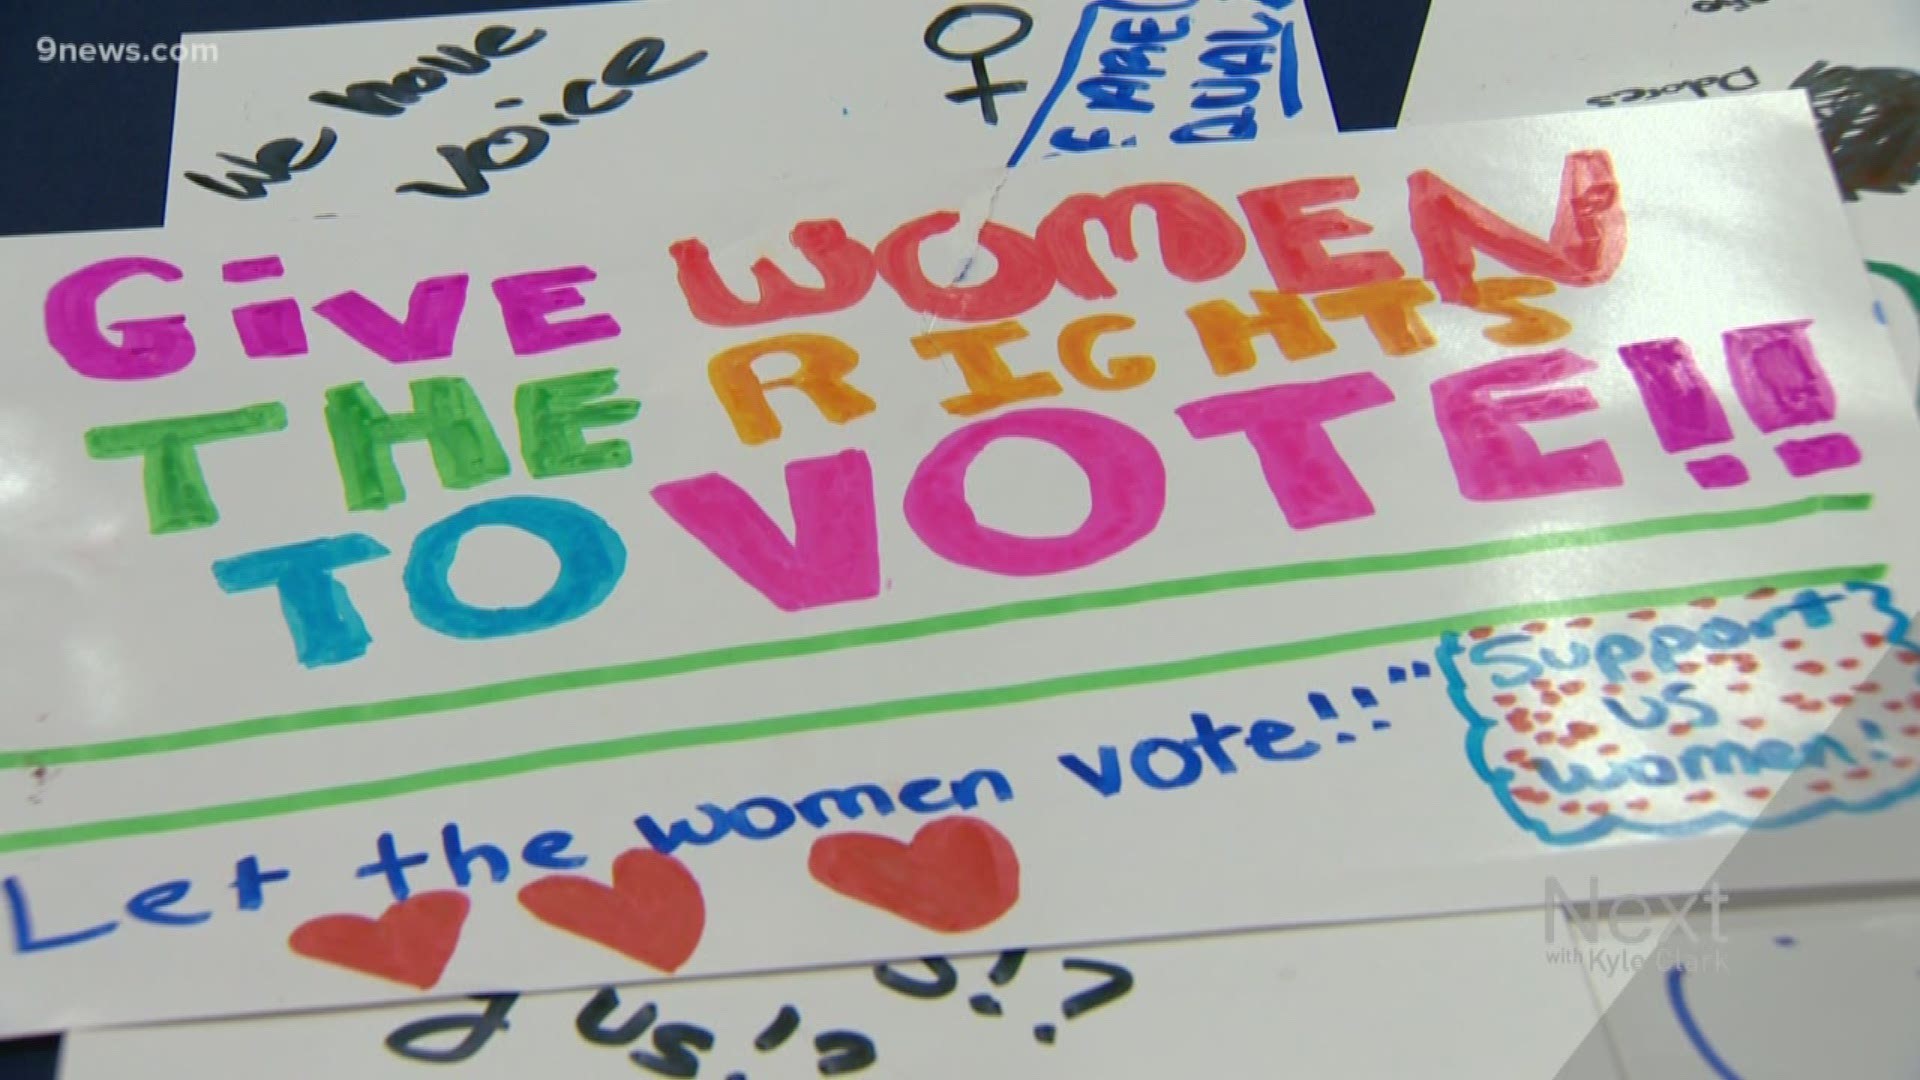 Women earned the right to vote 100 years ago in the United States. Some modern trailblazers in Colorado - Polly Baca, the first Hispanic woman elected to the Colorado State Senate, Candi CdeBaca, a run-off candidate seeking to be the first openly LGBTQ woman of color elected to the Denver City Council, and Jena Griswold, the youngest Secretary of State in America - were part of a panel that spoke to middle schoolers on women's rights. We chatted with the students after.